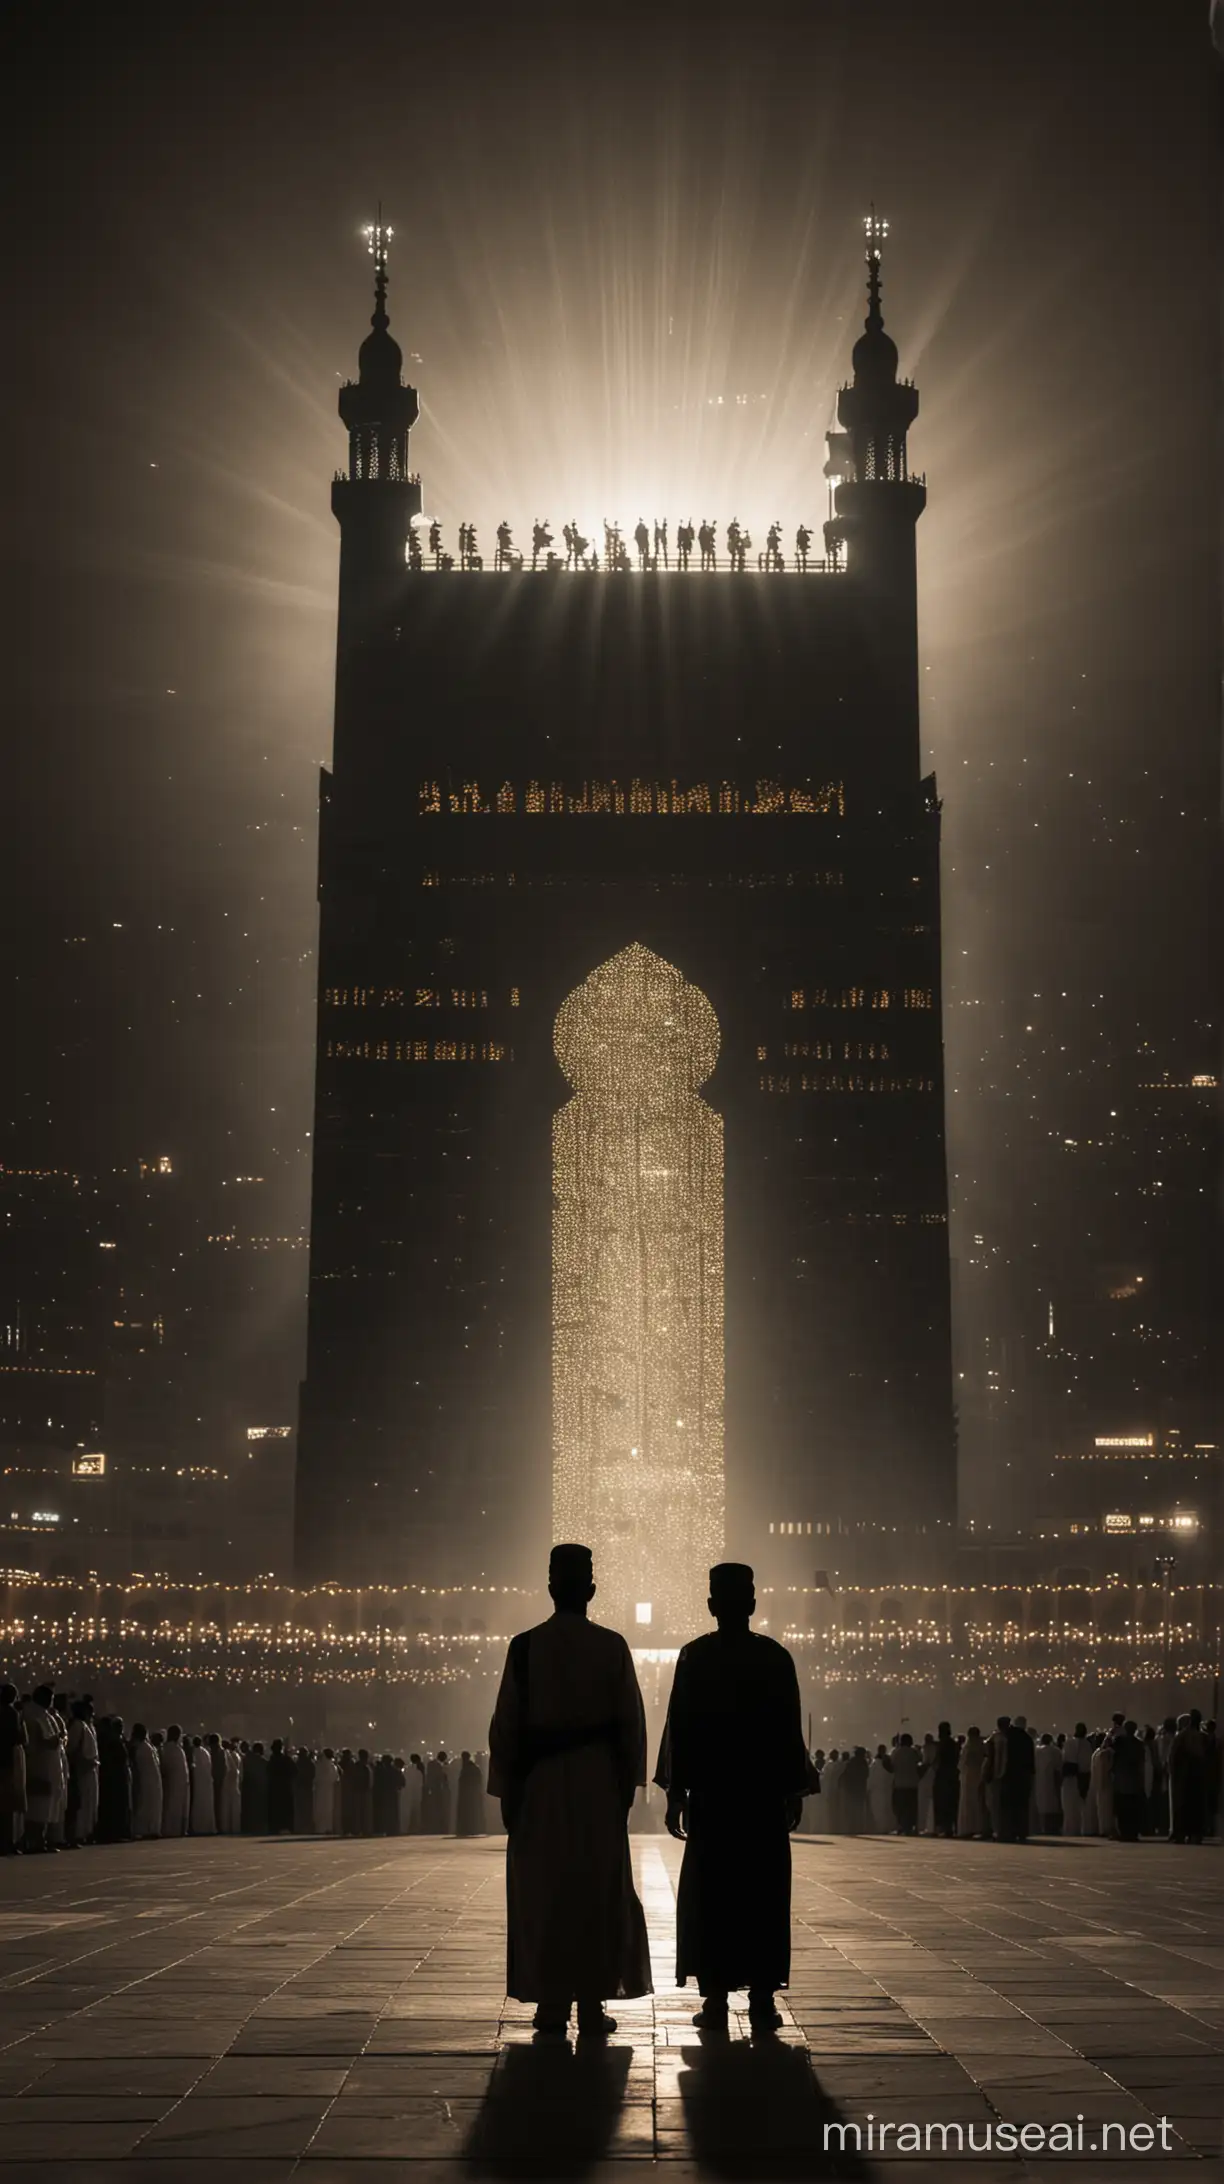 AlAmin Radiant Integrity at the Kaaba in Mecca